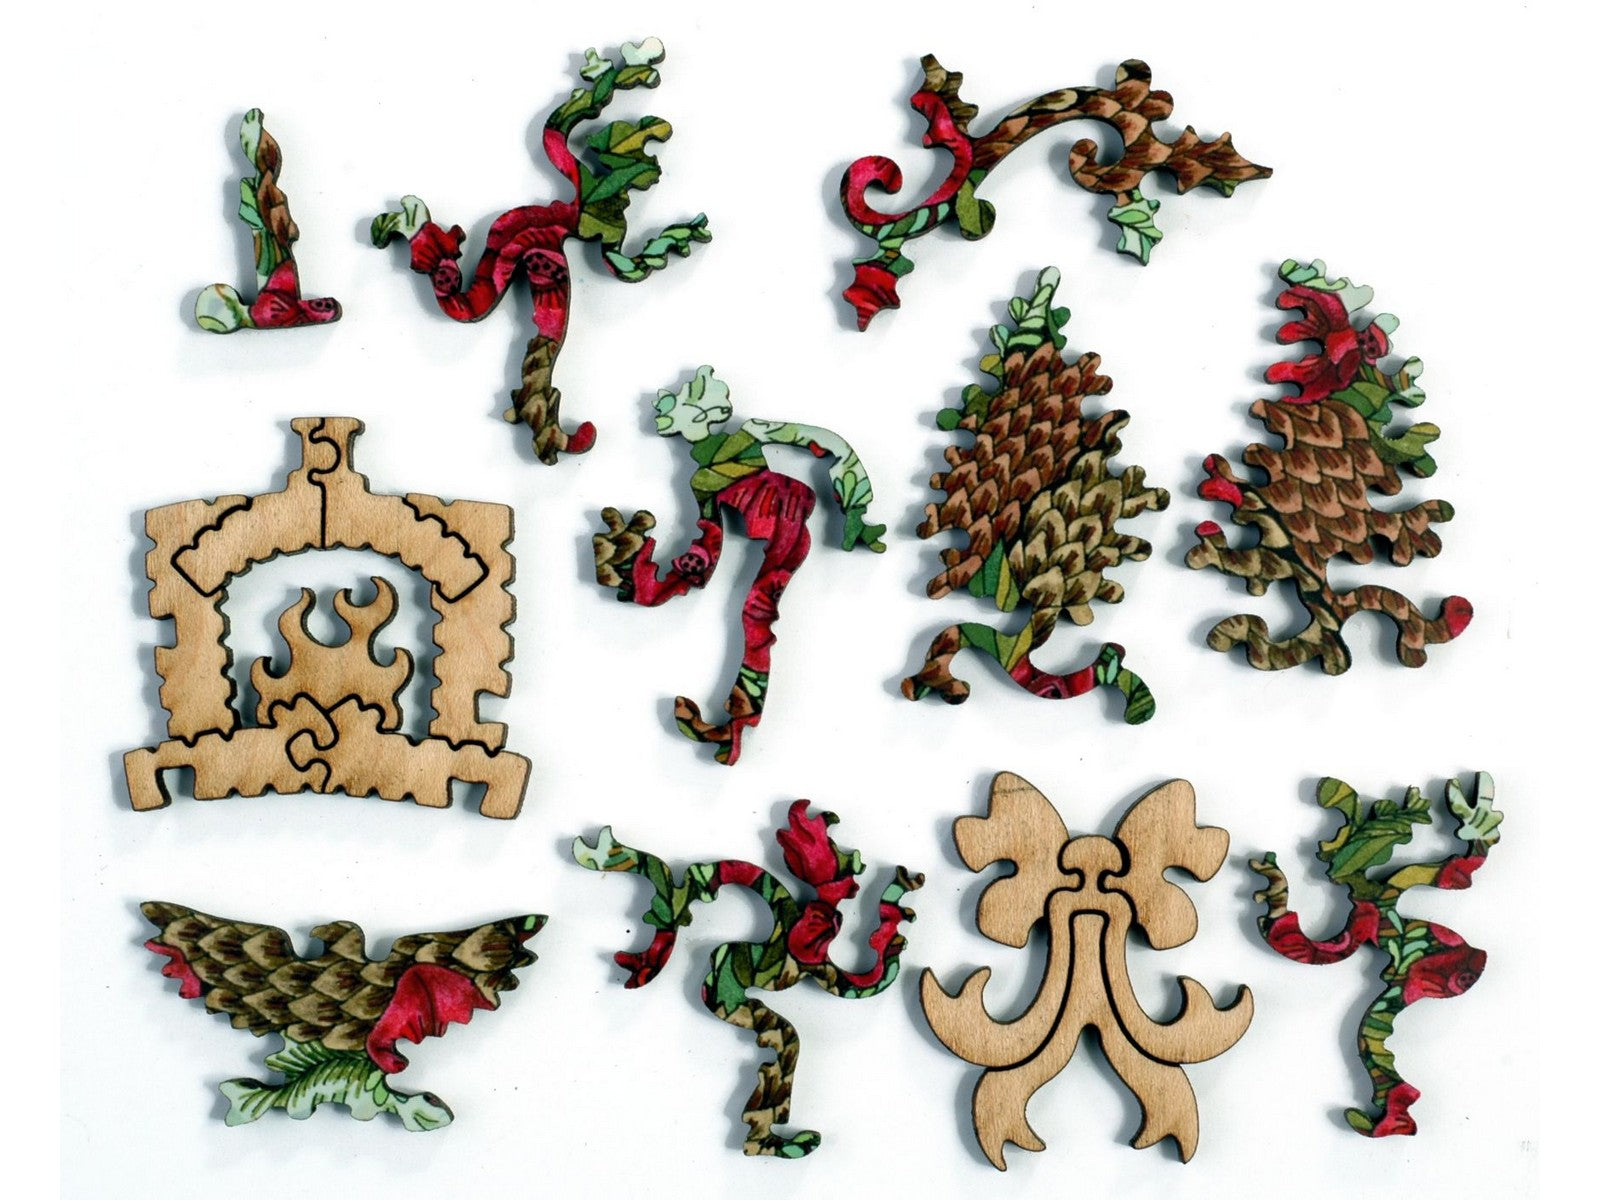 The whimsy pieces that can be found in the puzzle, Pinecone and Pomegranate Wreath.